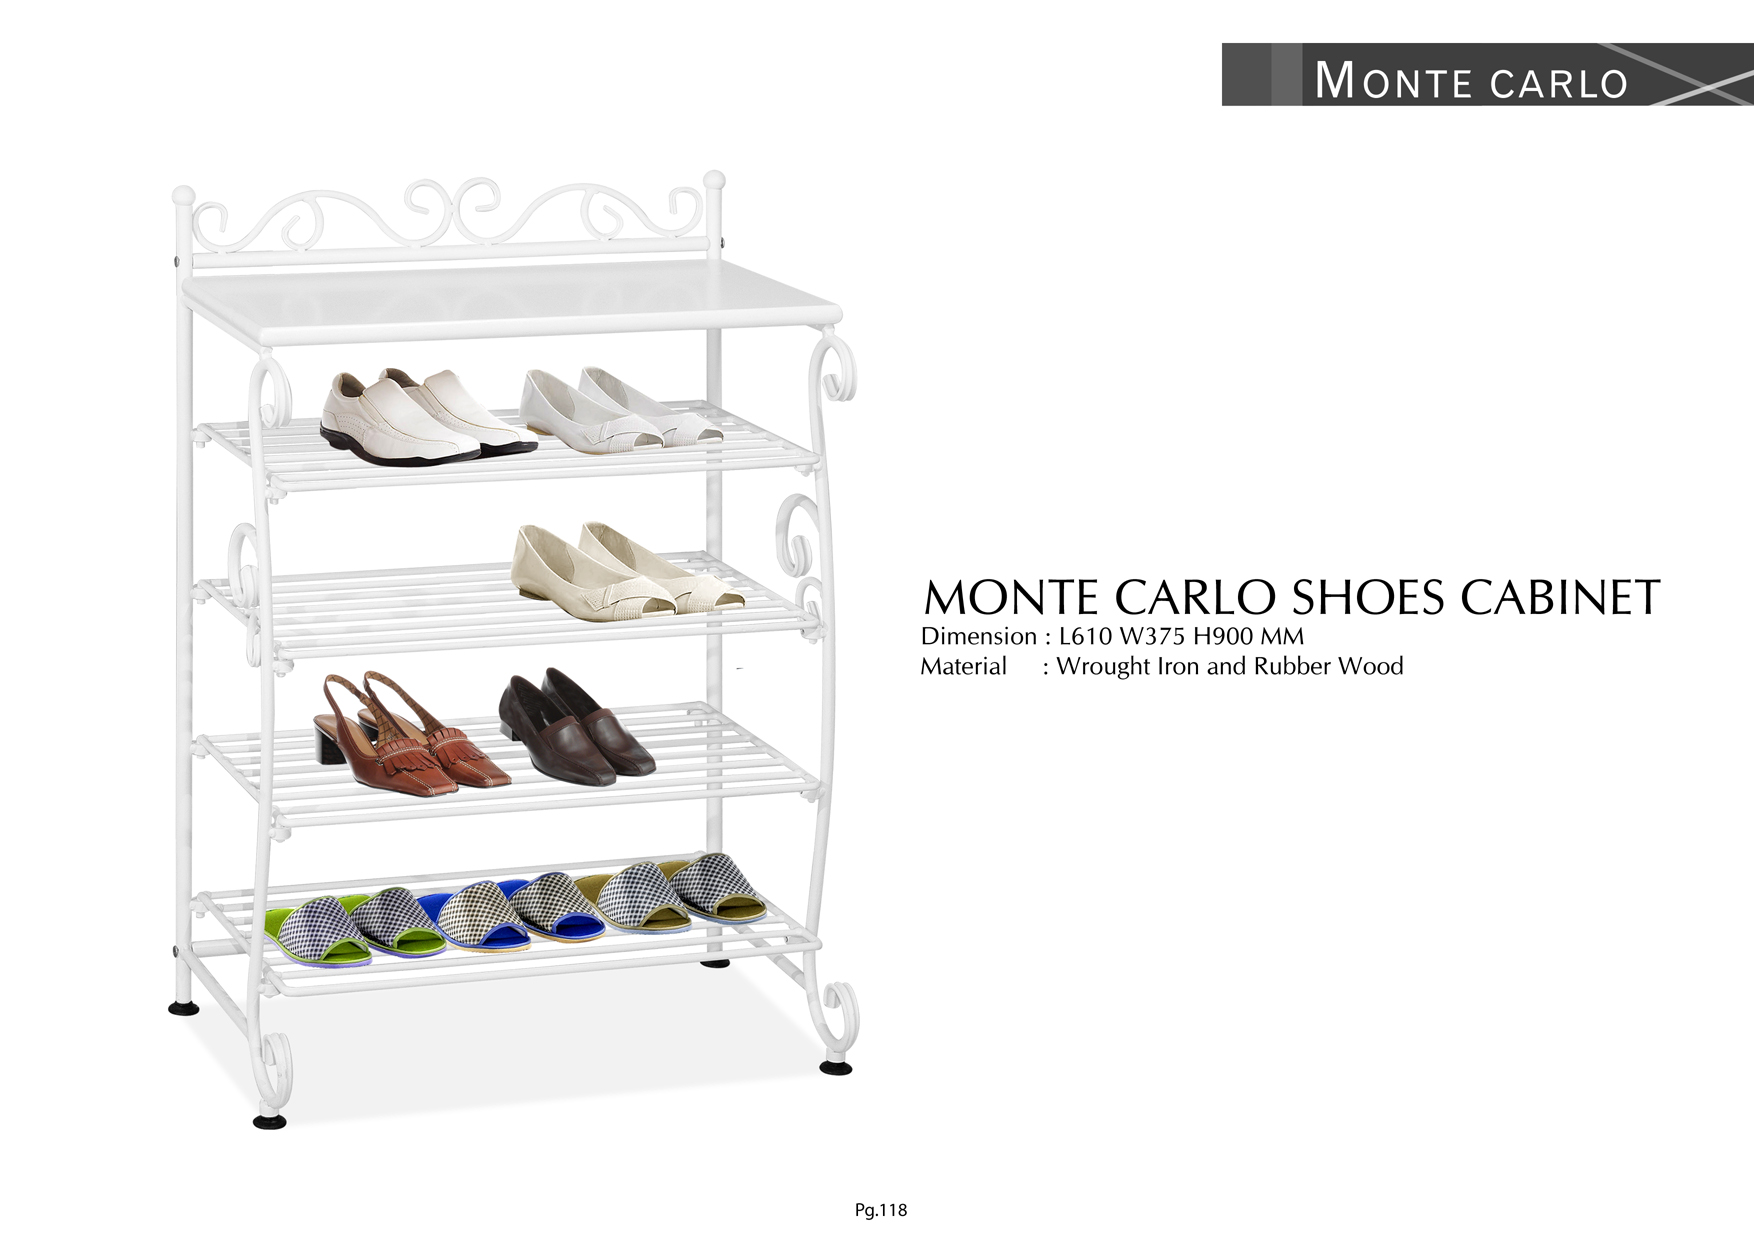 Product: PG118. MONTE CARLO SHOES CABINET